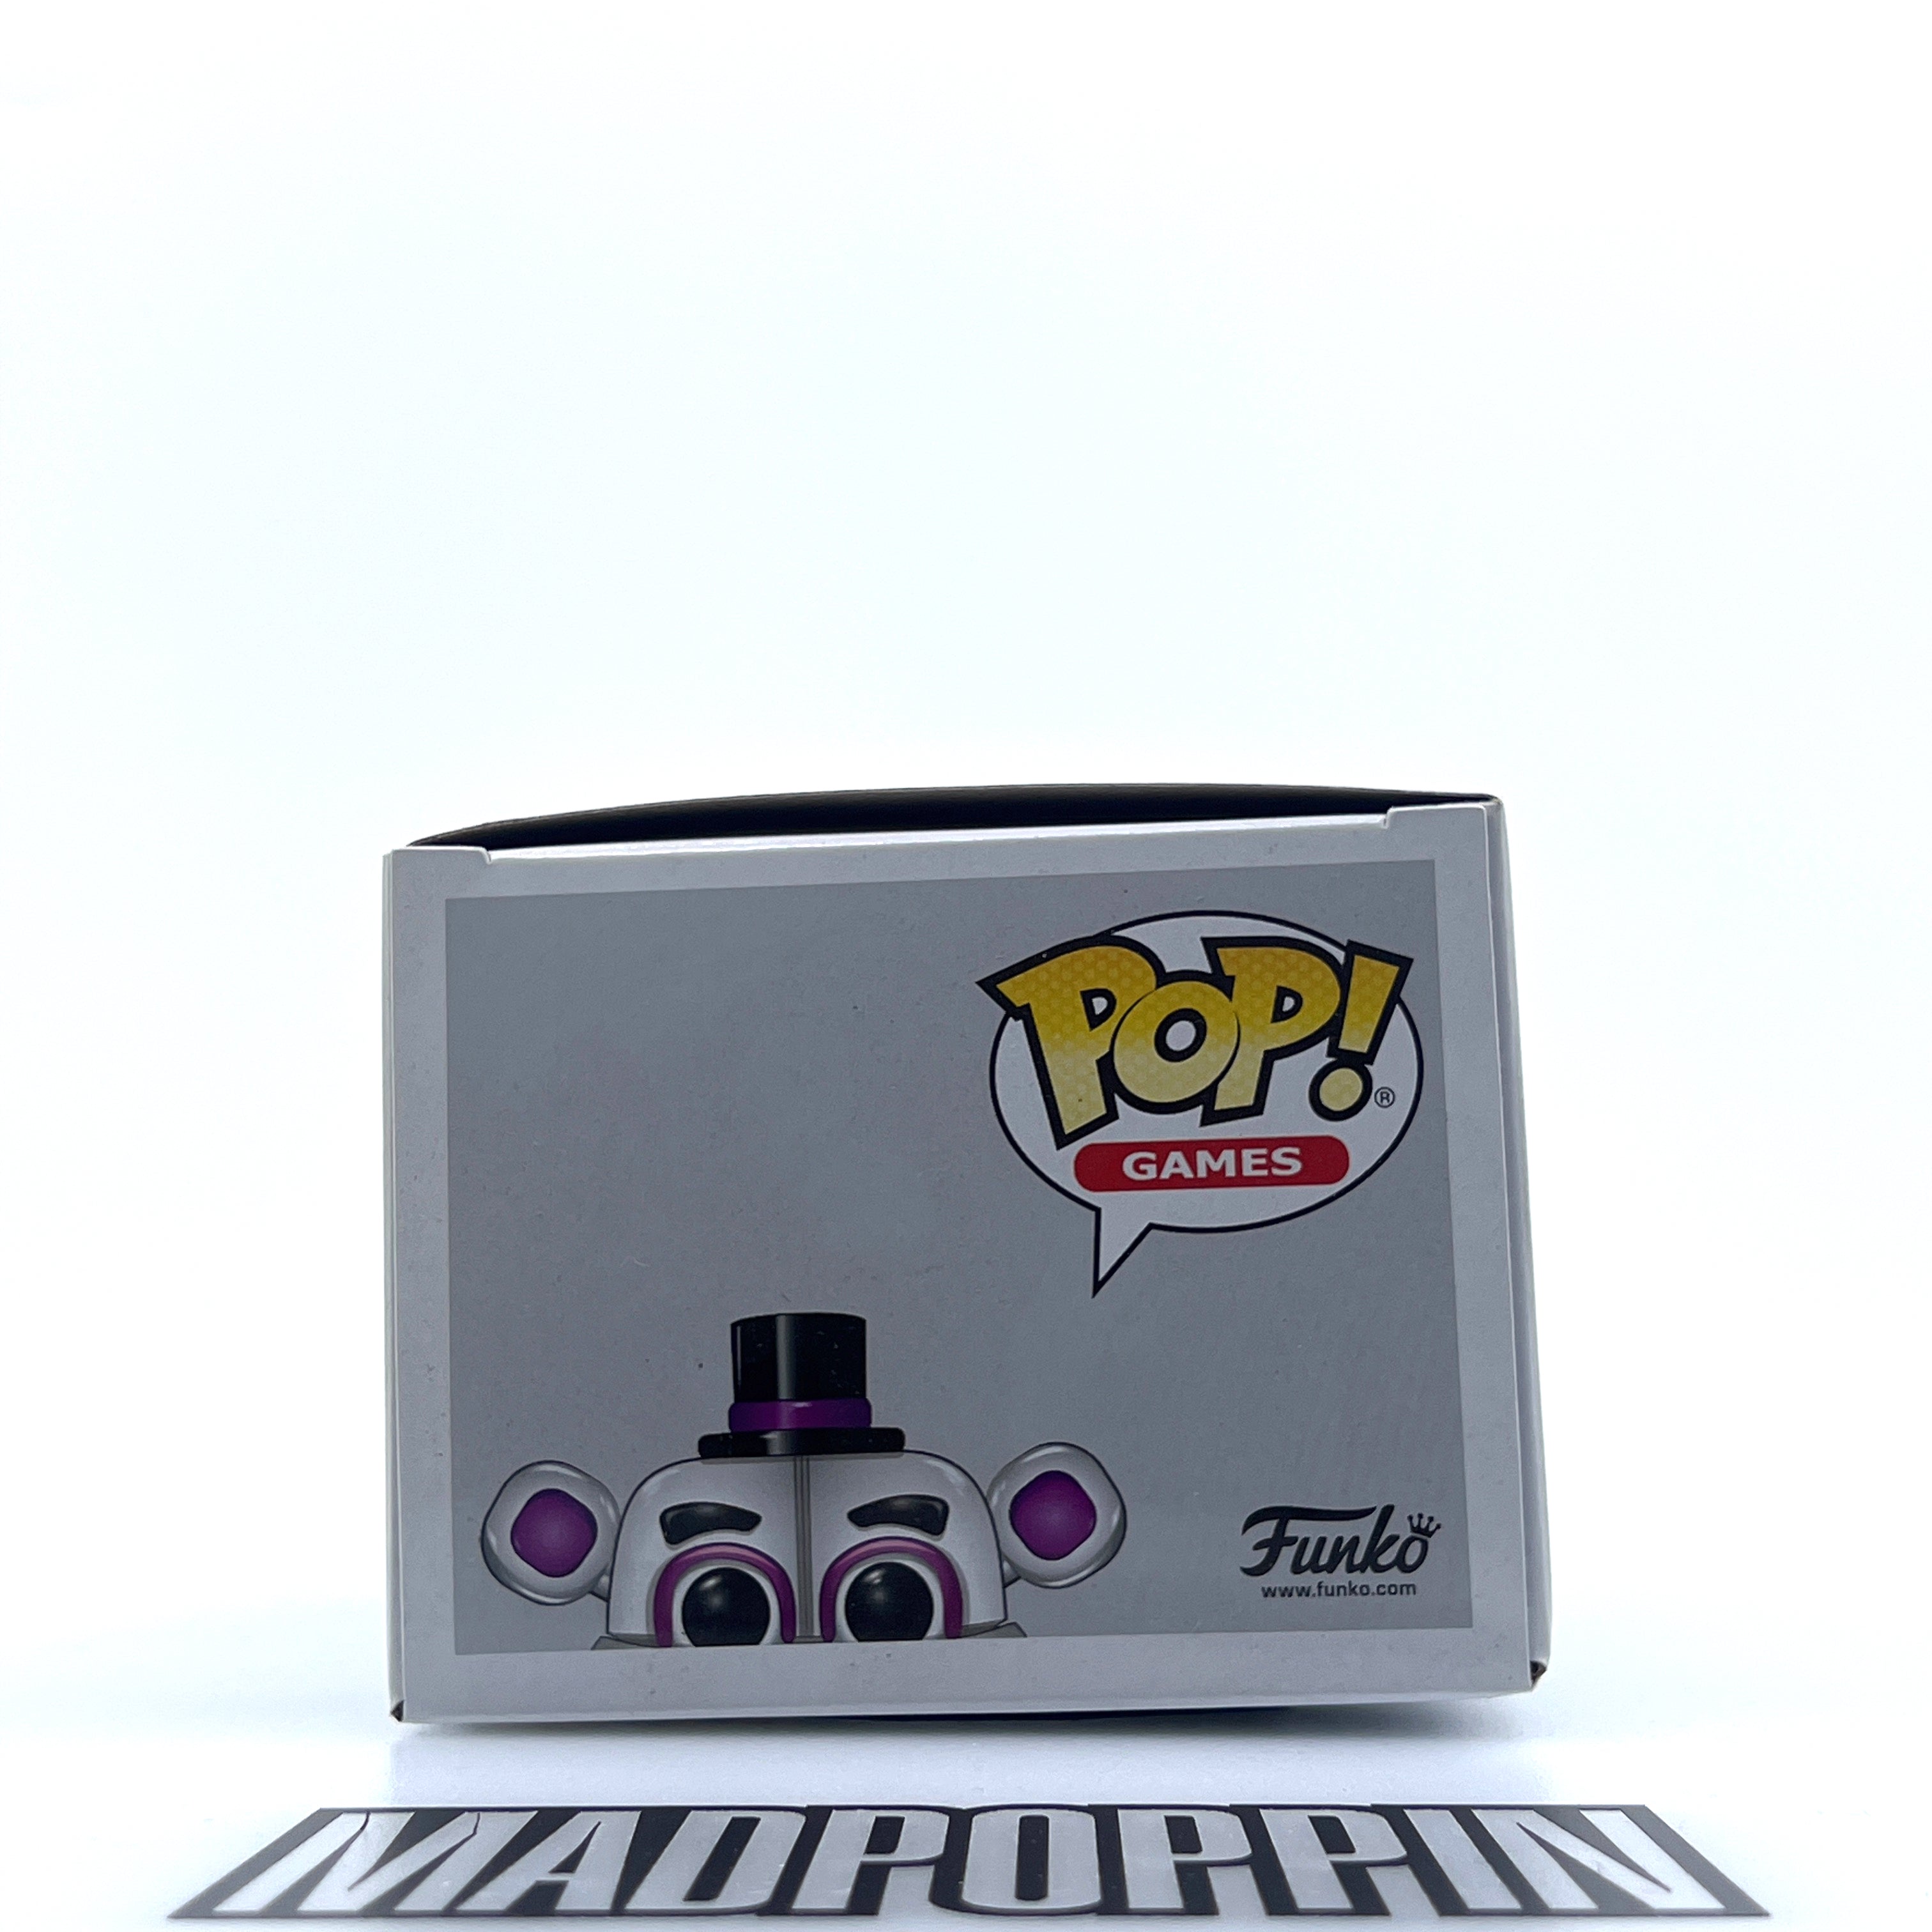 Funko Pop Games Five Nights at Freddy's Sister Location Funtime Freddy Vaulted 225